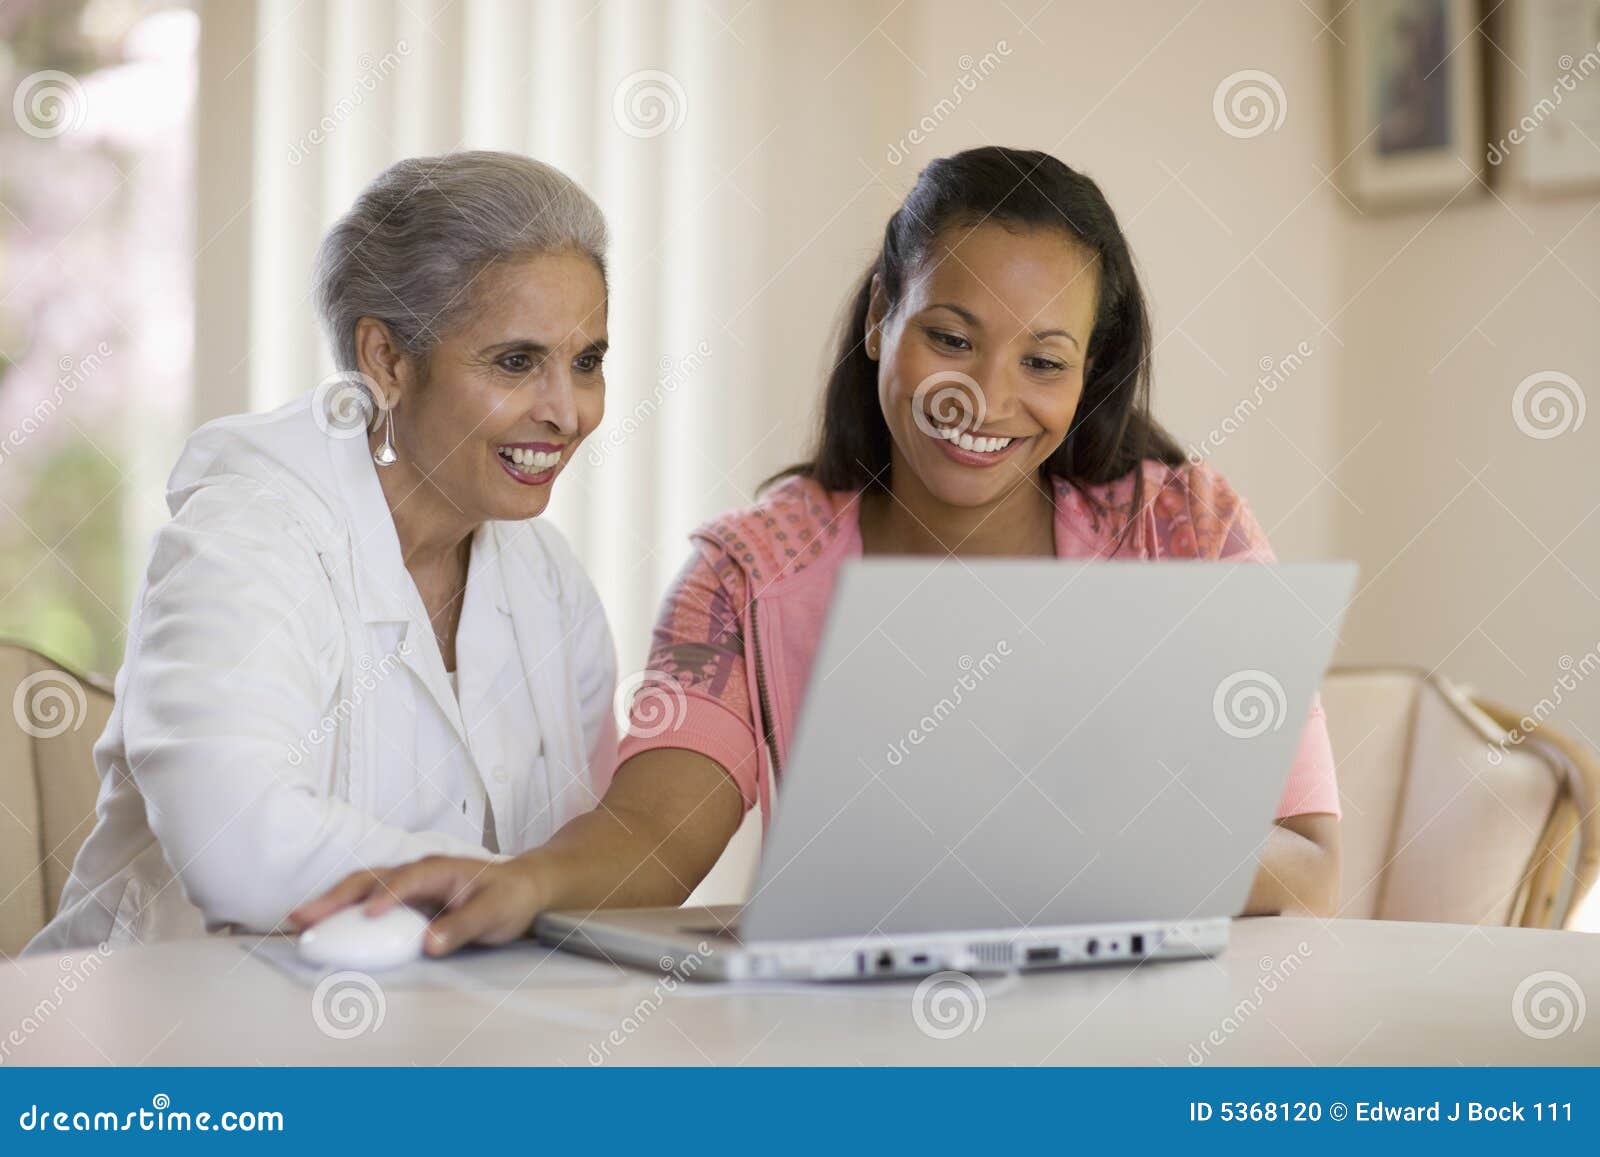 Mother And Daughter At The Computer Stock Image - Image of 